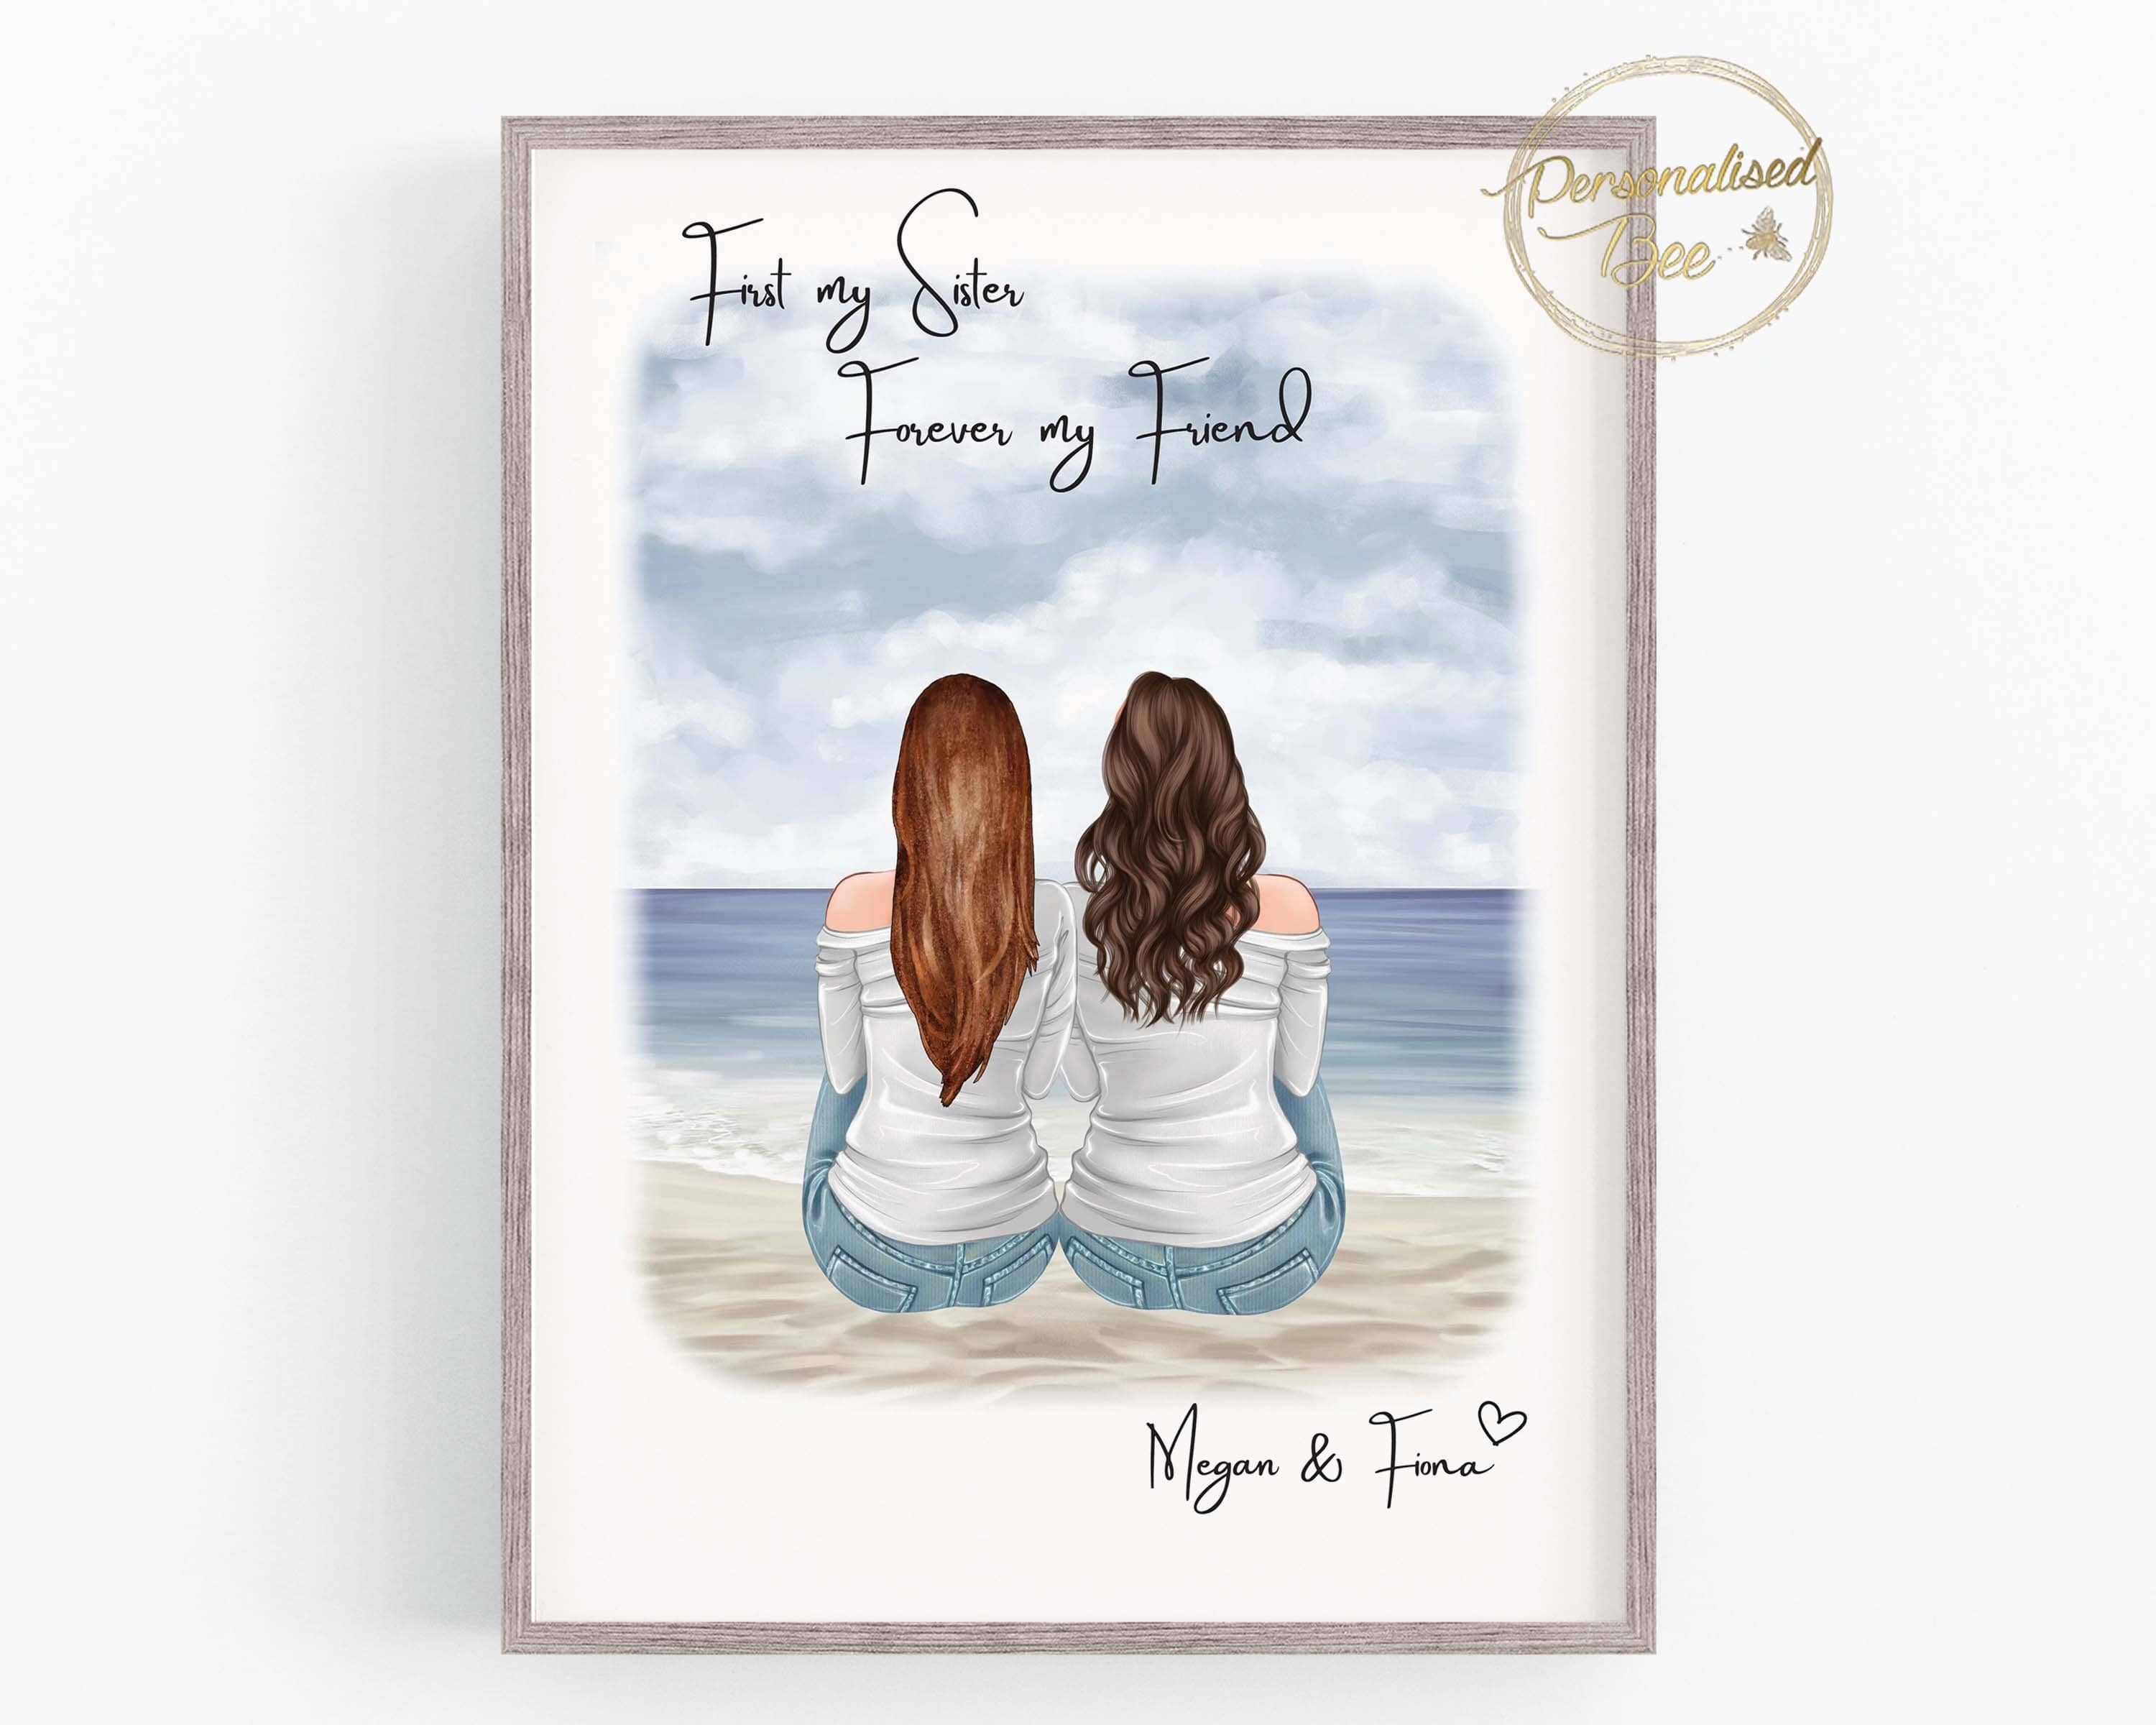 Personalised Sister Gift, Birthday Gift for Sister, Gift from a Sister, Custom Portrait Print, First My Sister Forever My Friend, Siblings